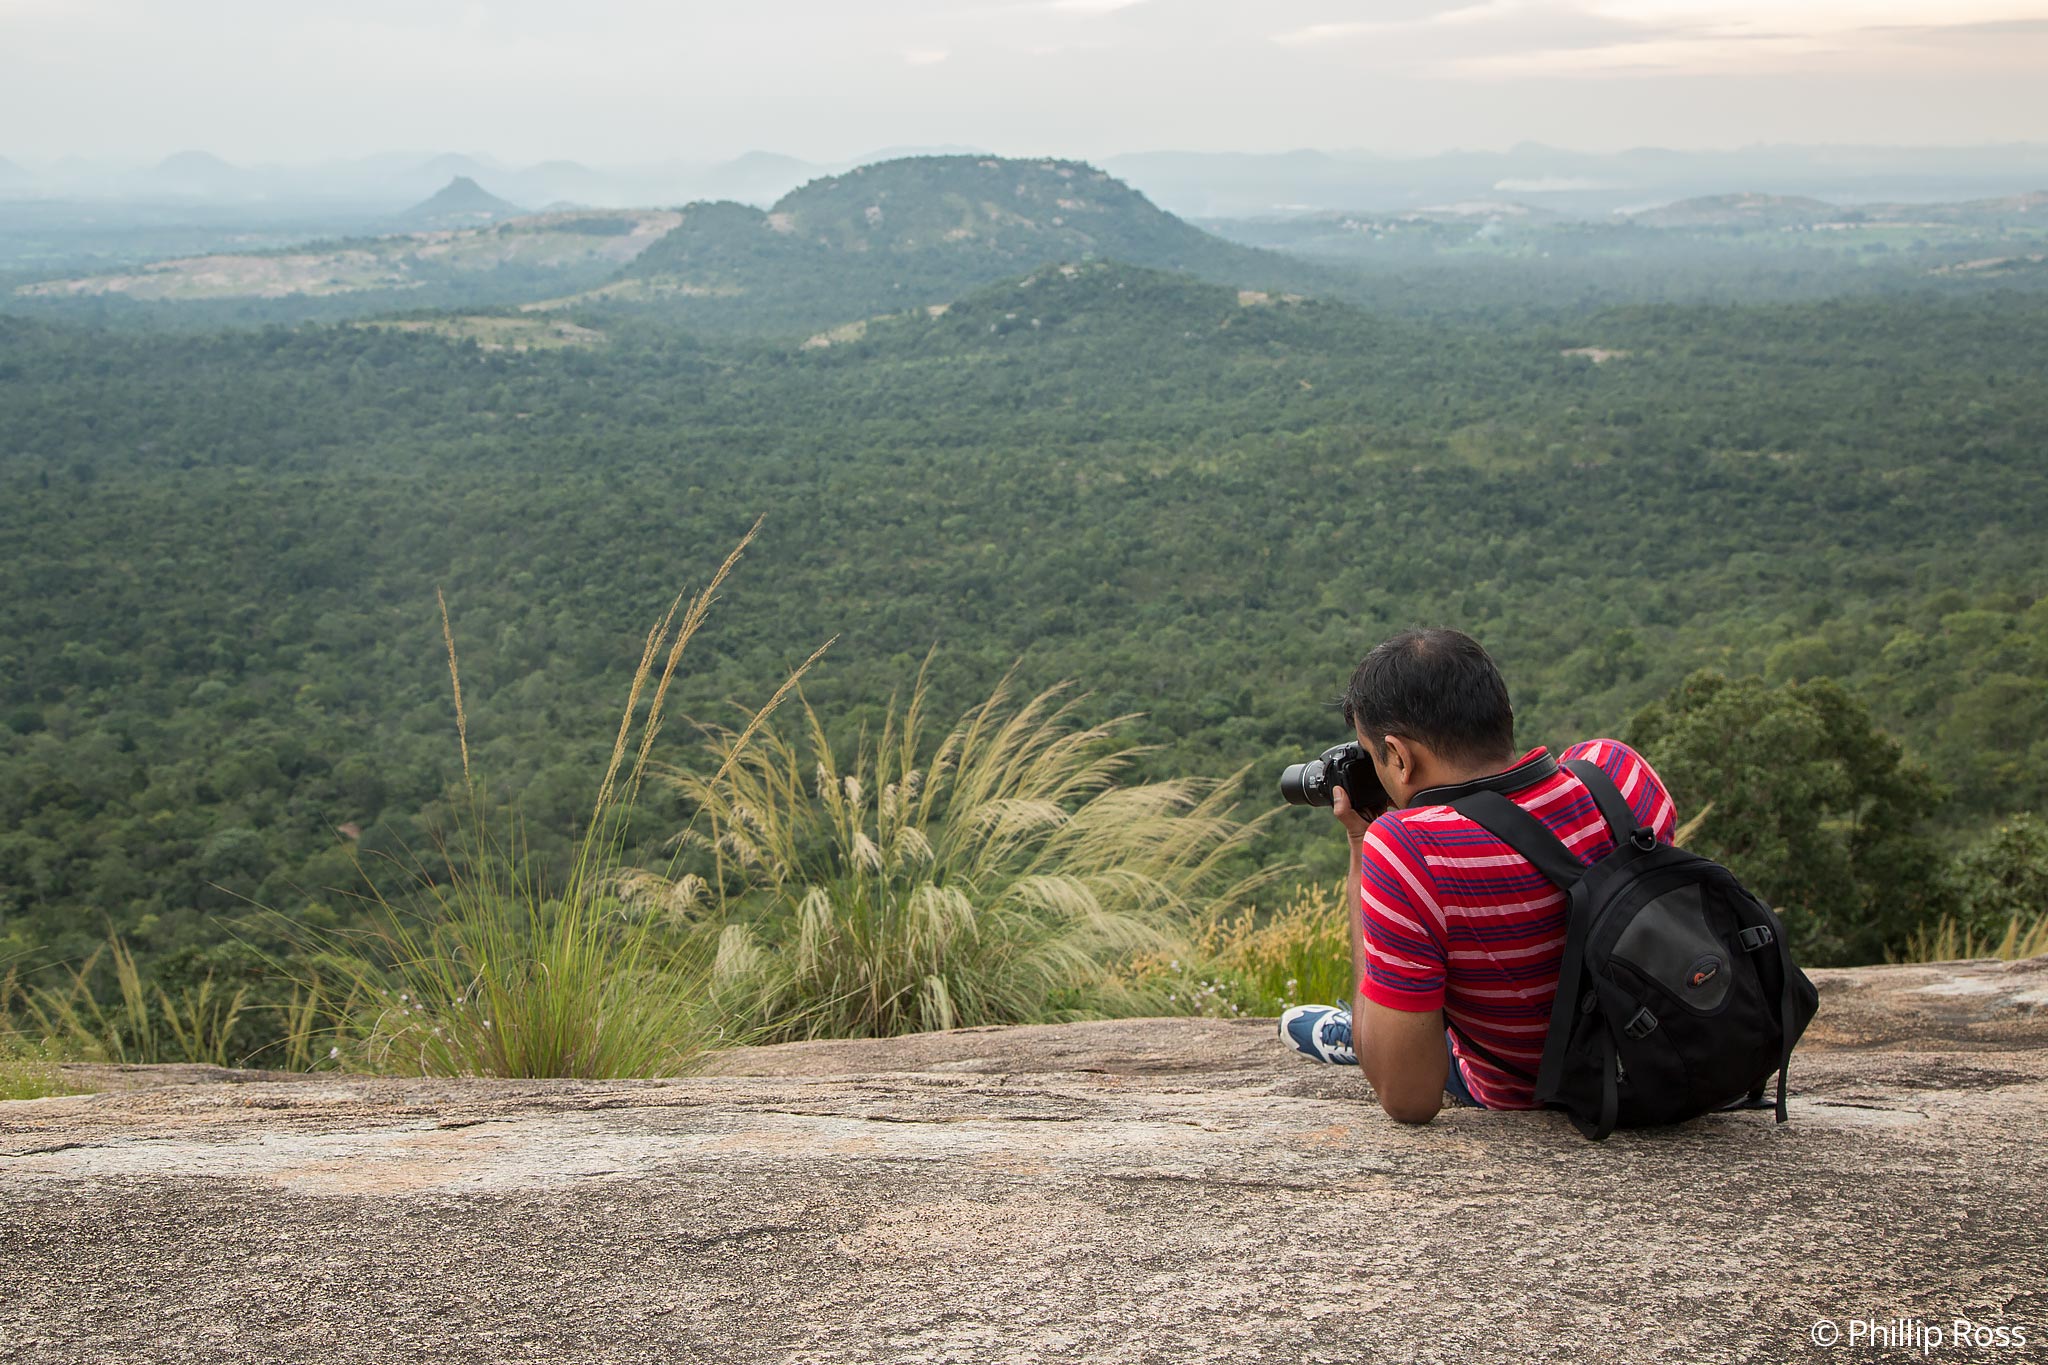 A participant on our Photography Workshop photographing the beautiful landscape of Bannerghatta